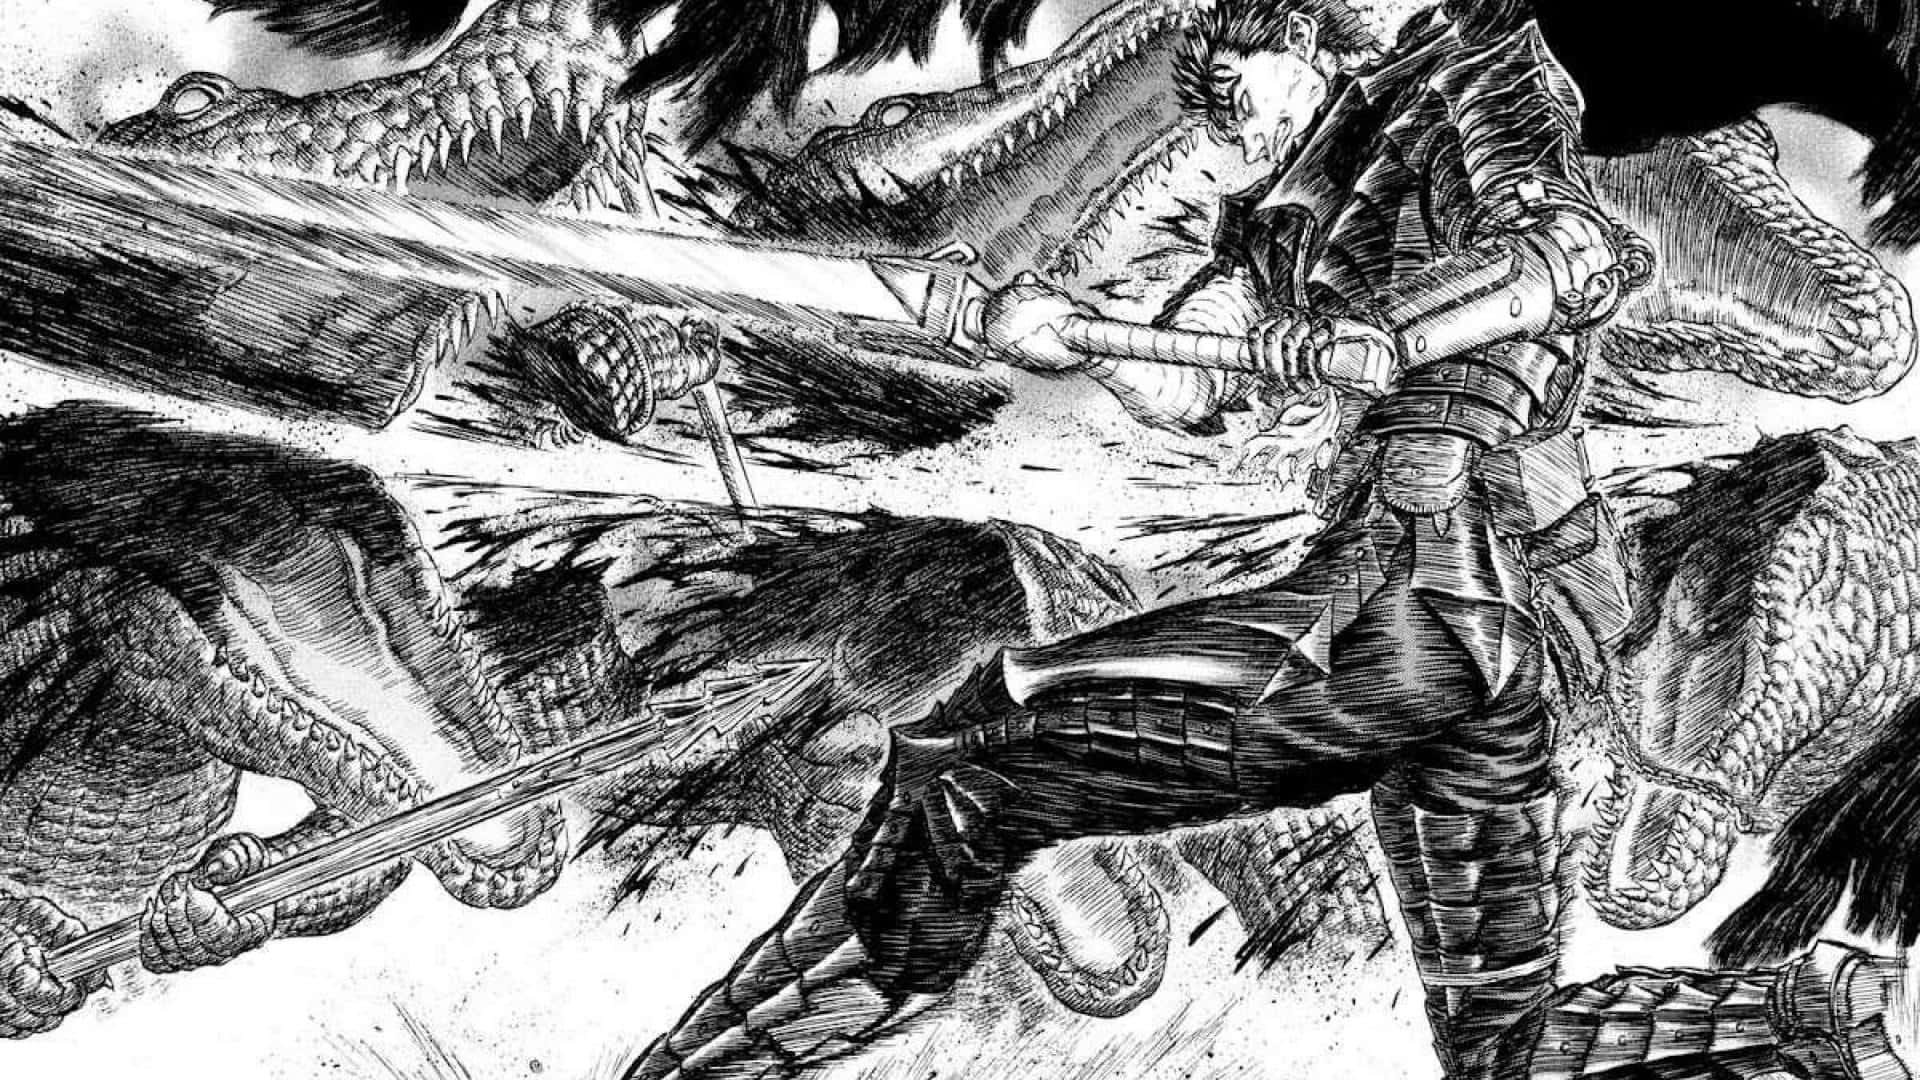 Succumb to the darkness of Berserk, a powerful and thrilling manga series. Wallpaper